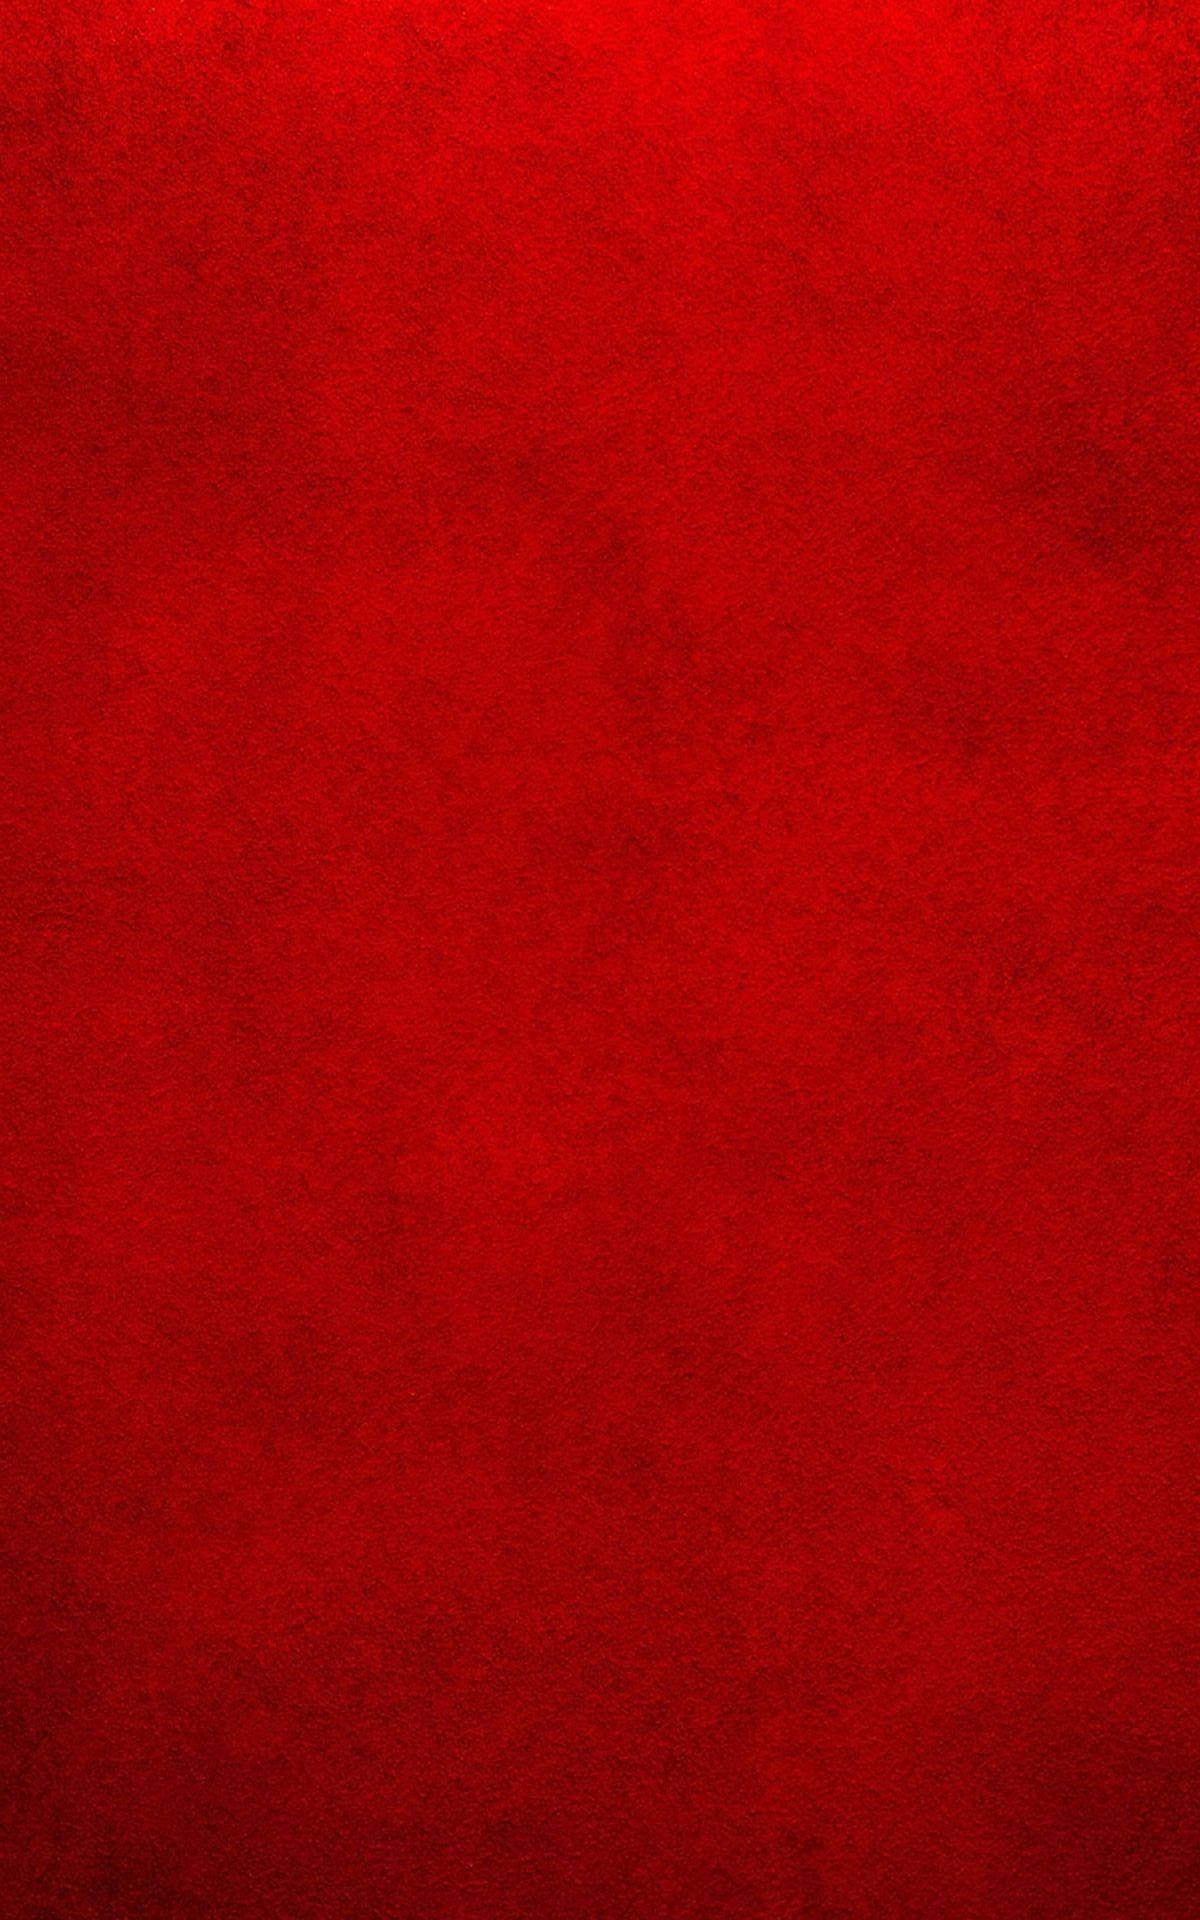 Painted Wall Red Iphone Wallpaper